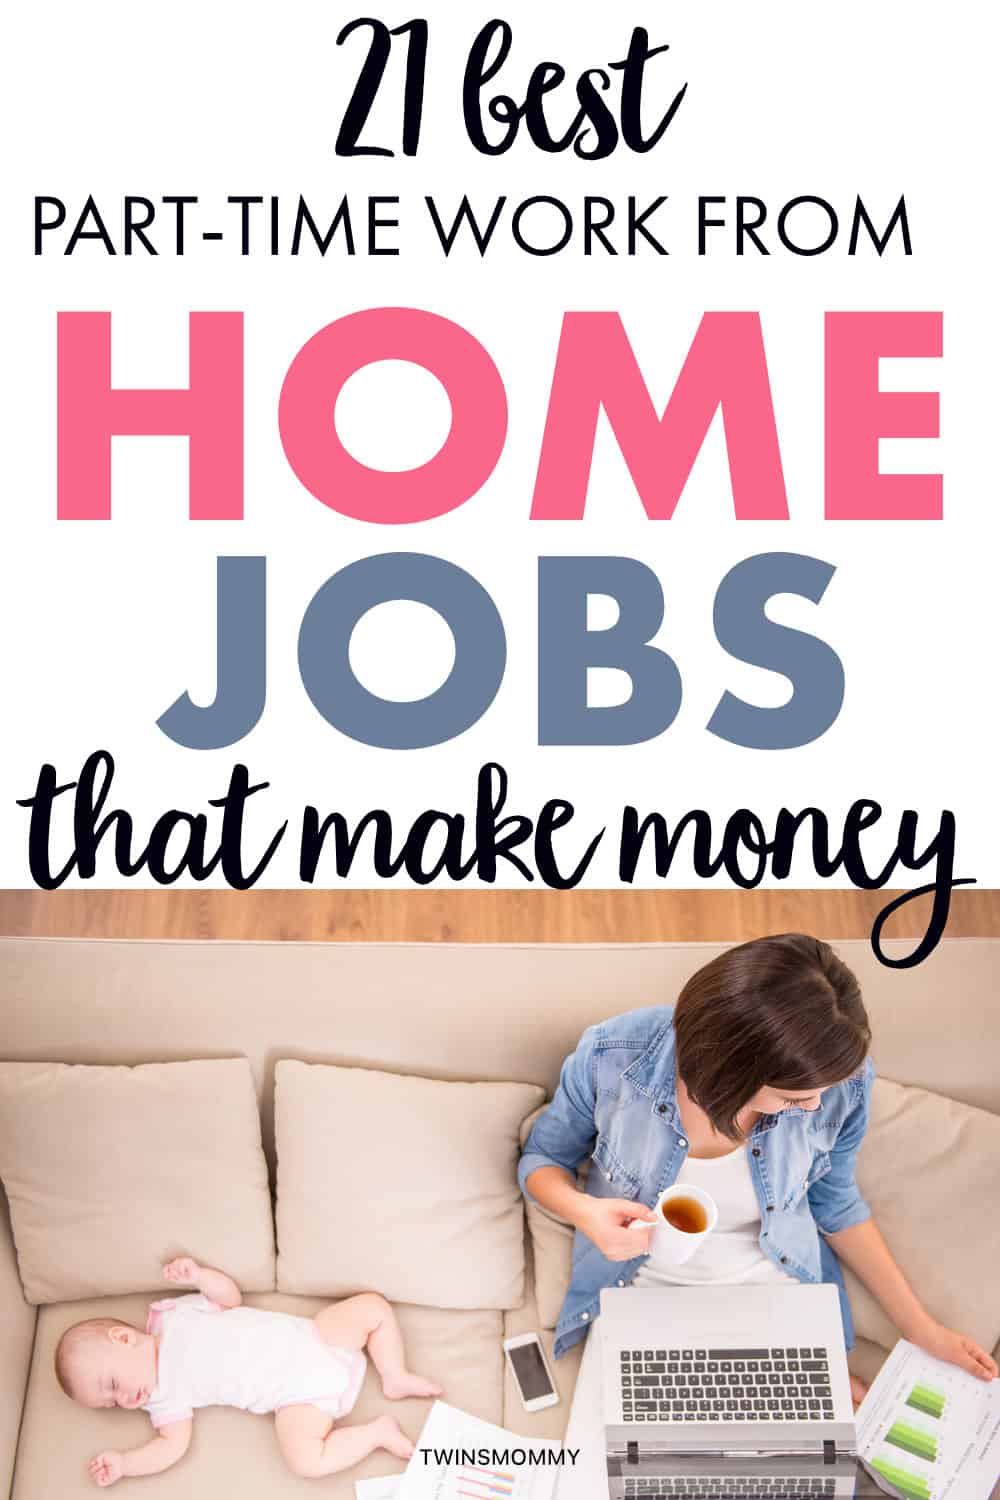 work from home jobs 4 days a week